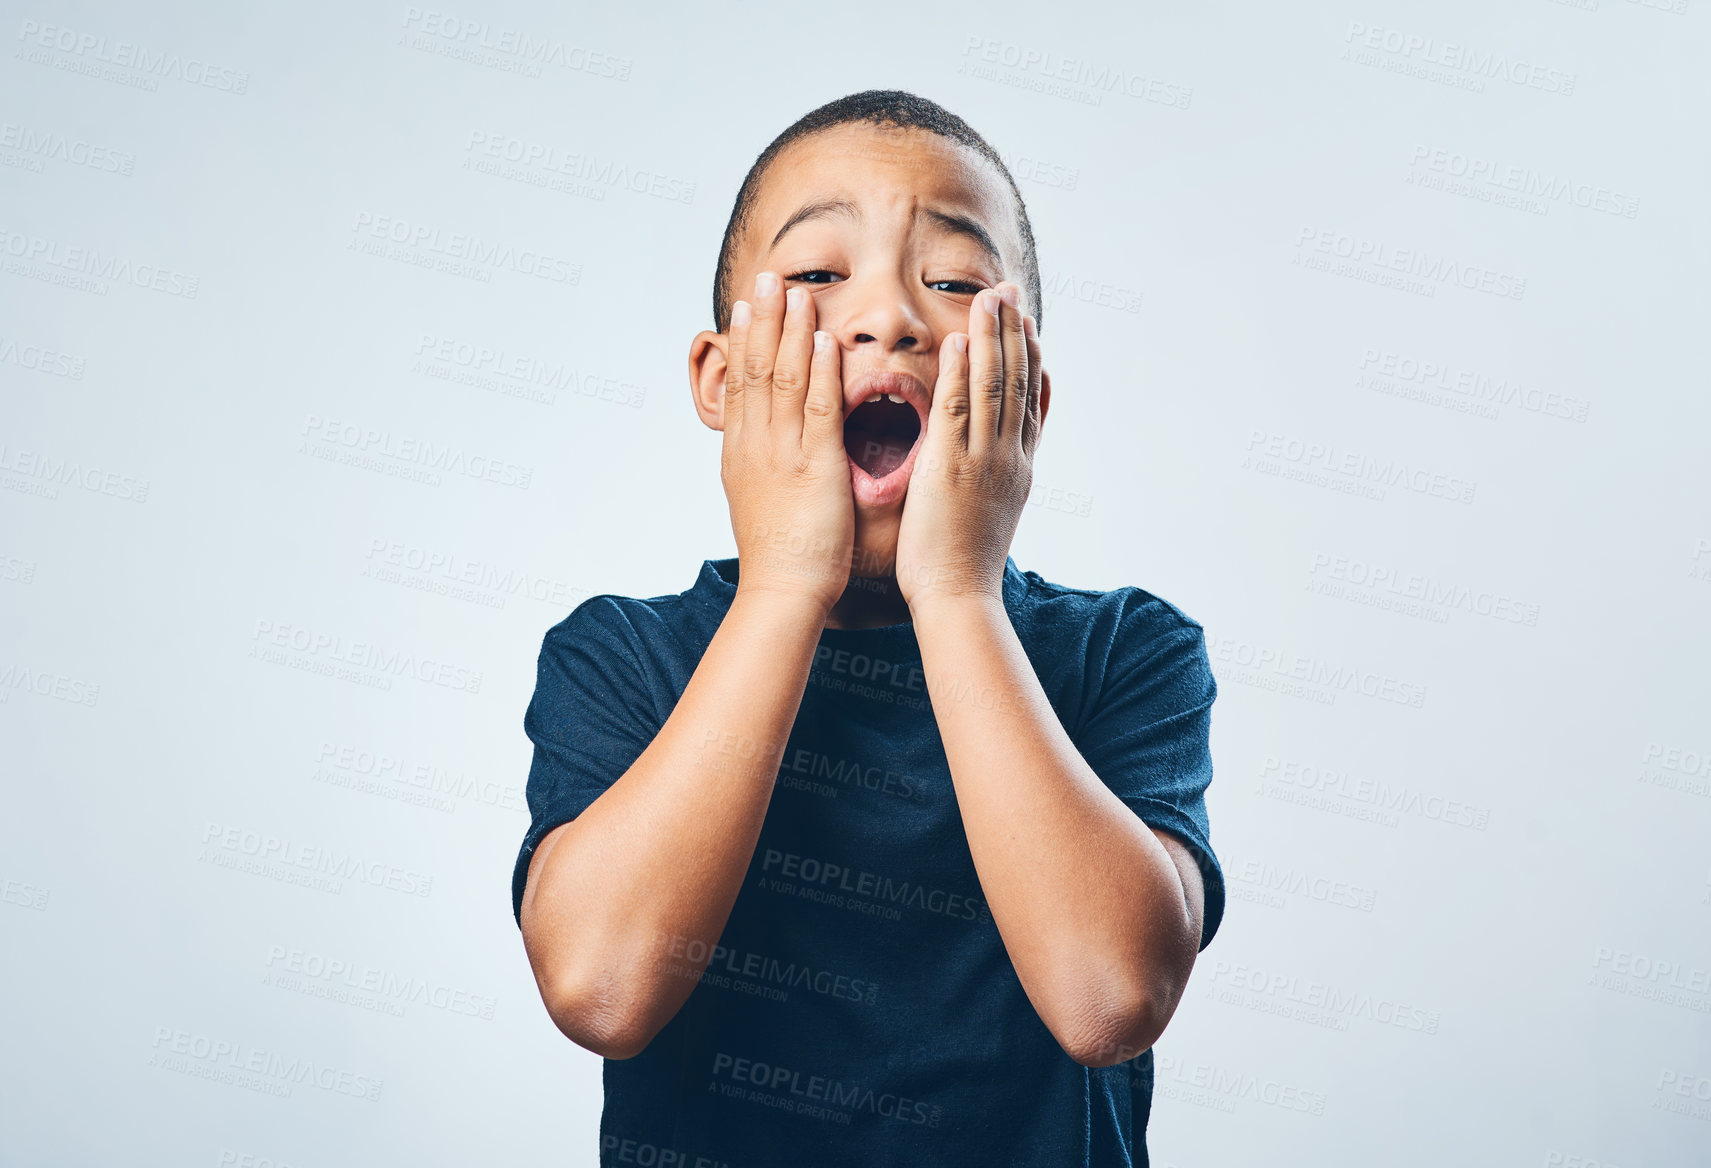 Buy stock photo Studio shot of a cute little boy looking amazed against a grey background